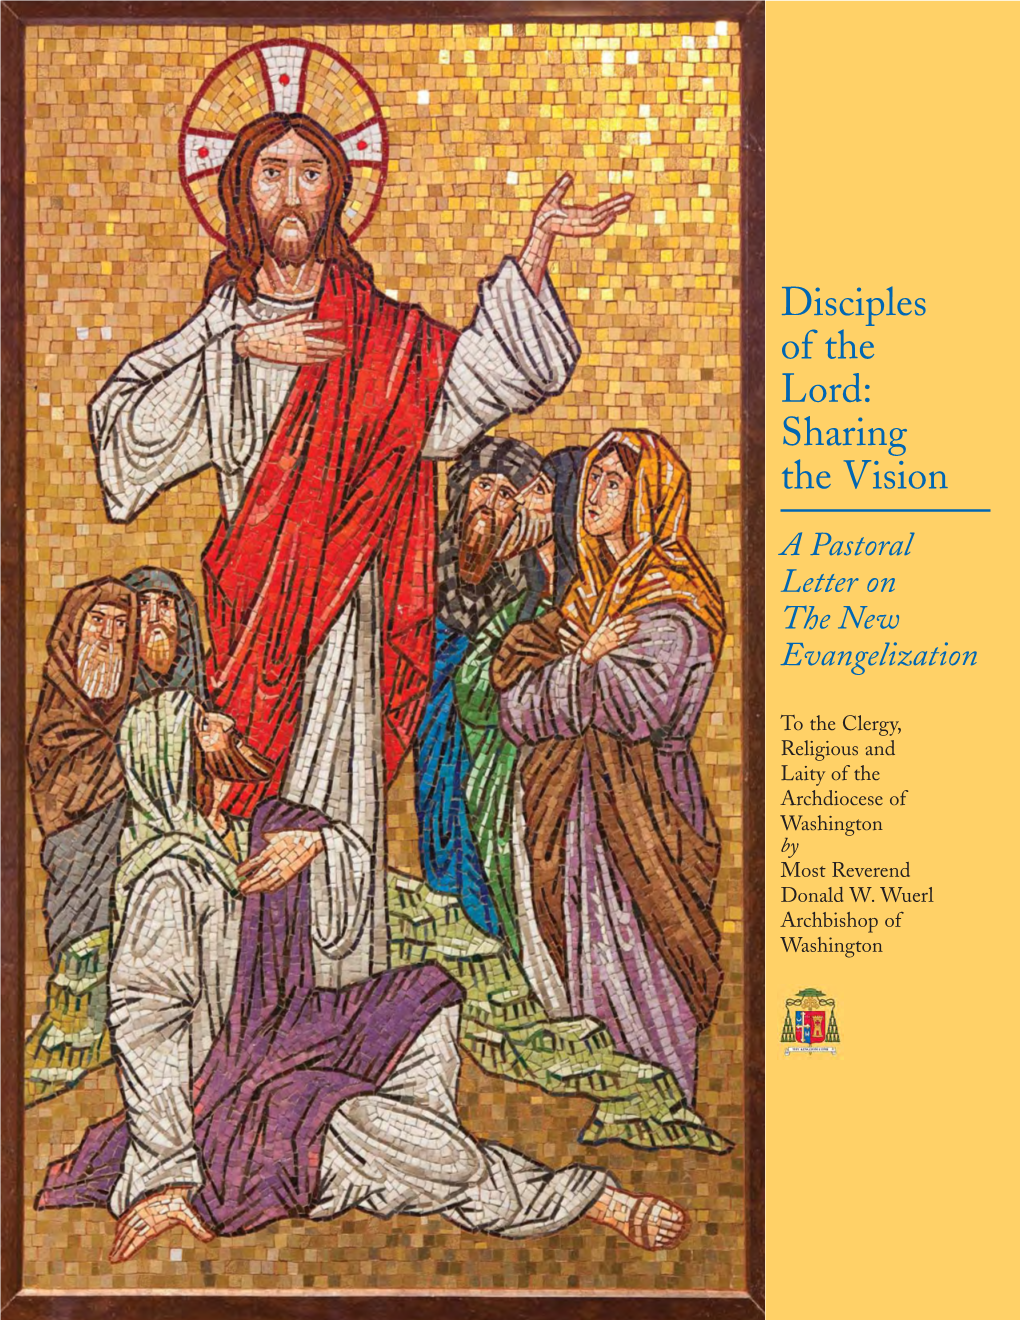 Disciples of the Lord: Sharing the Vision a Pastoral Letter on the New Evangelization